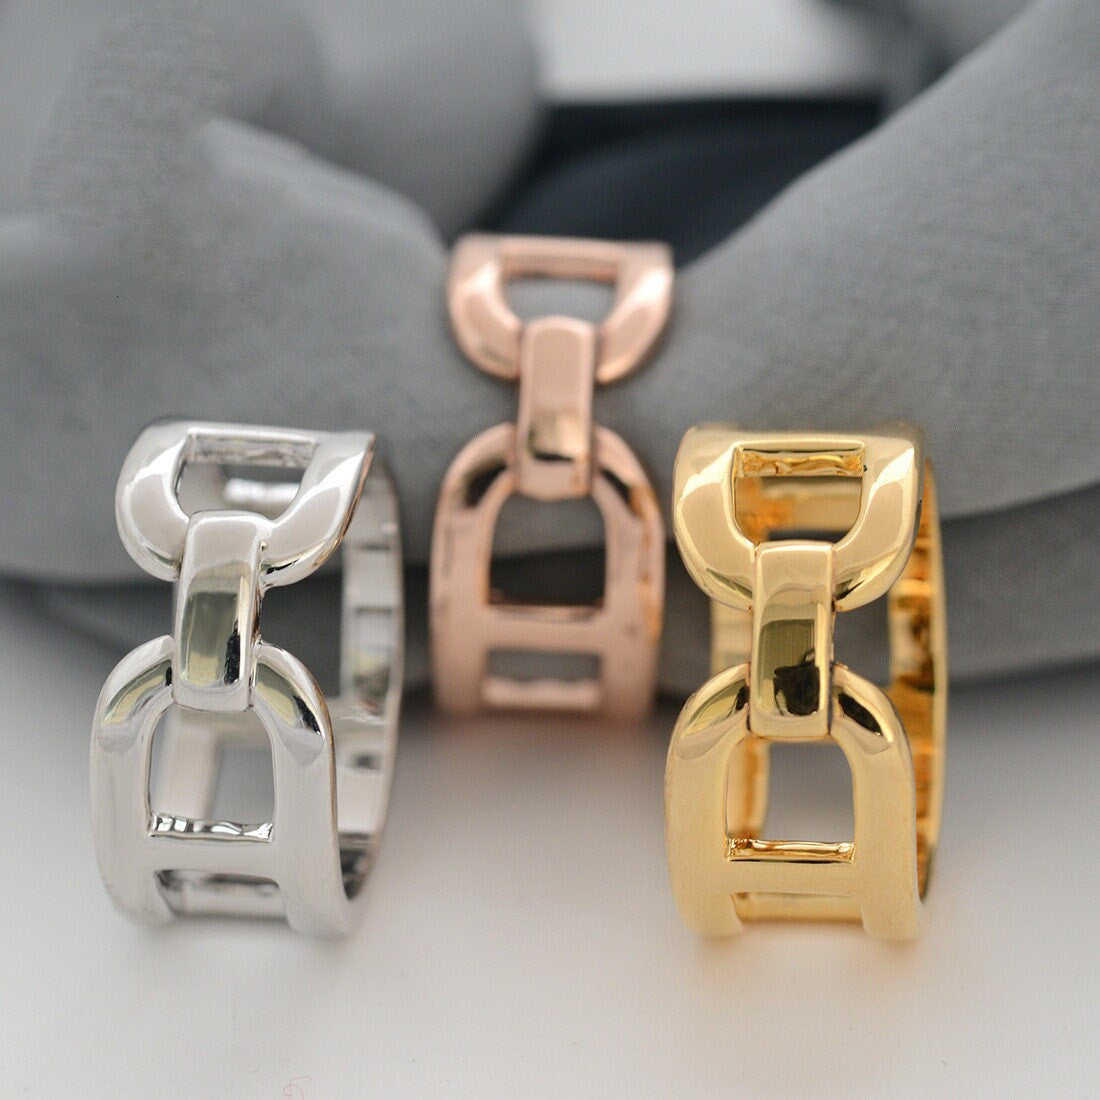 Genuine 18K Gold Plated Scarf Ring Jewerly Accesories/ Scarf Buckle, 3 colors - Awulook